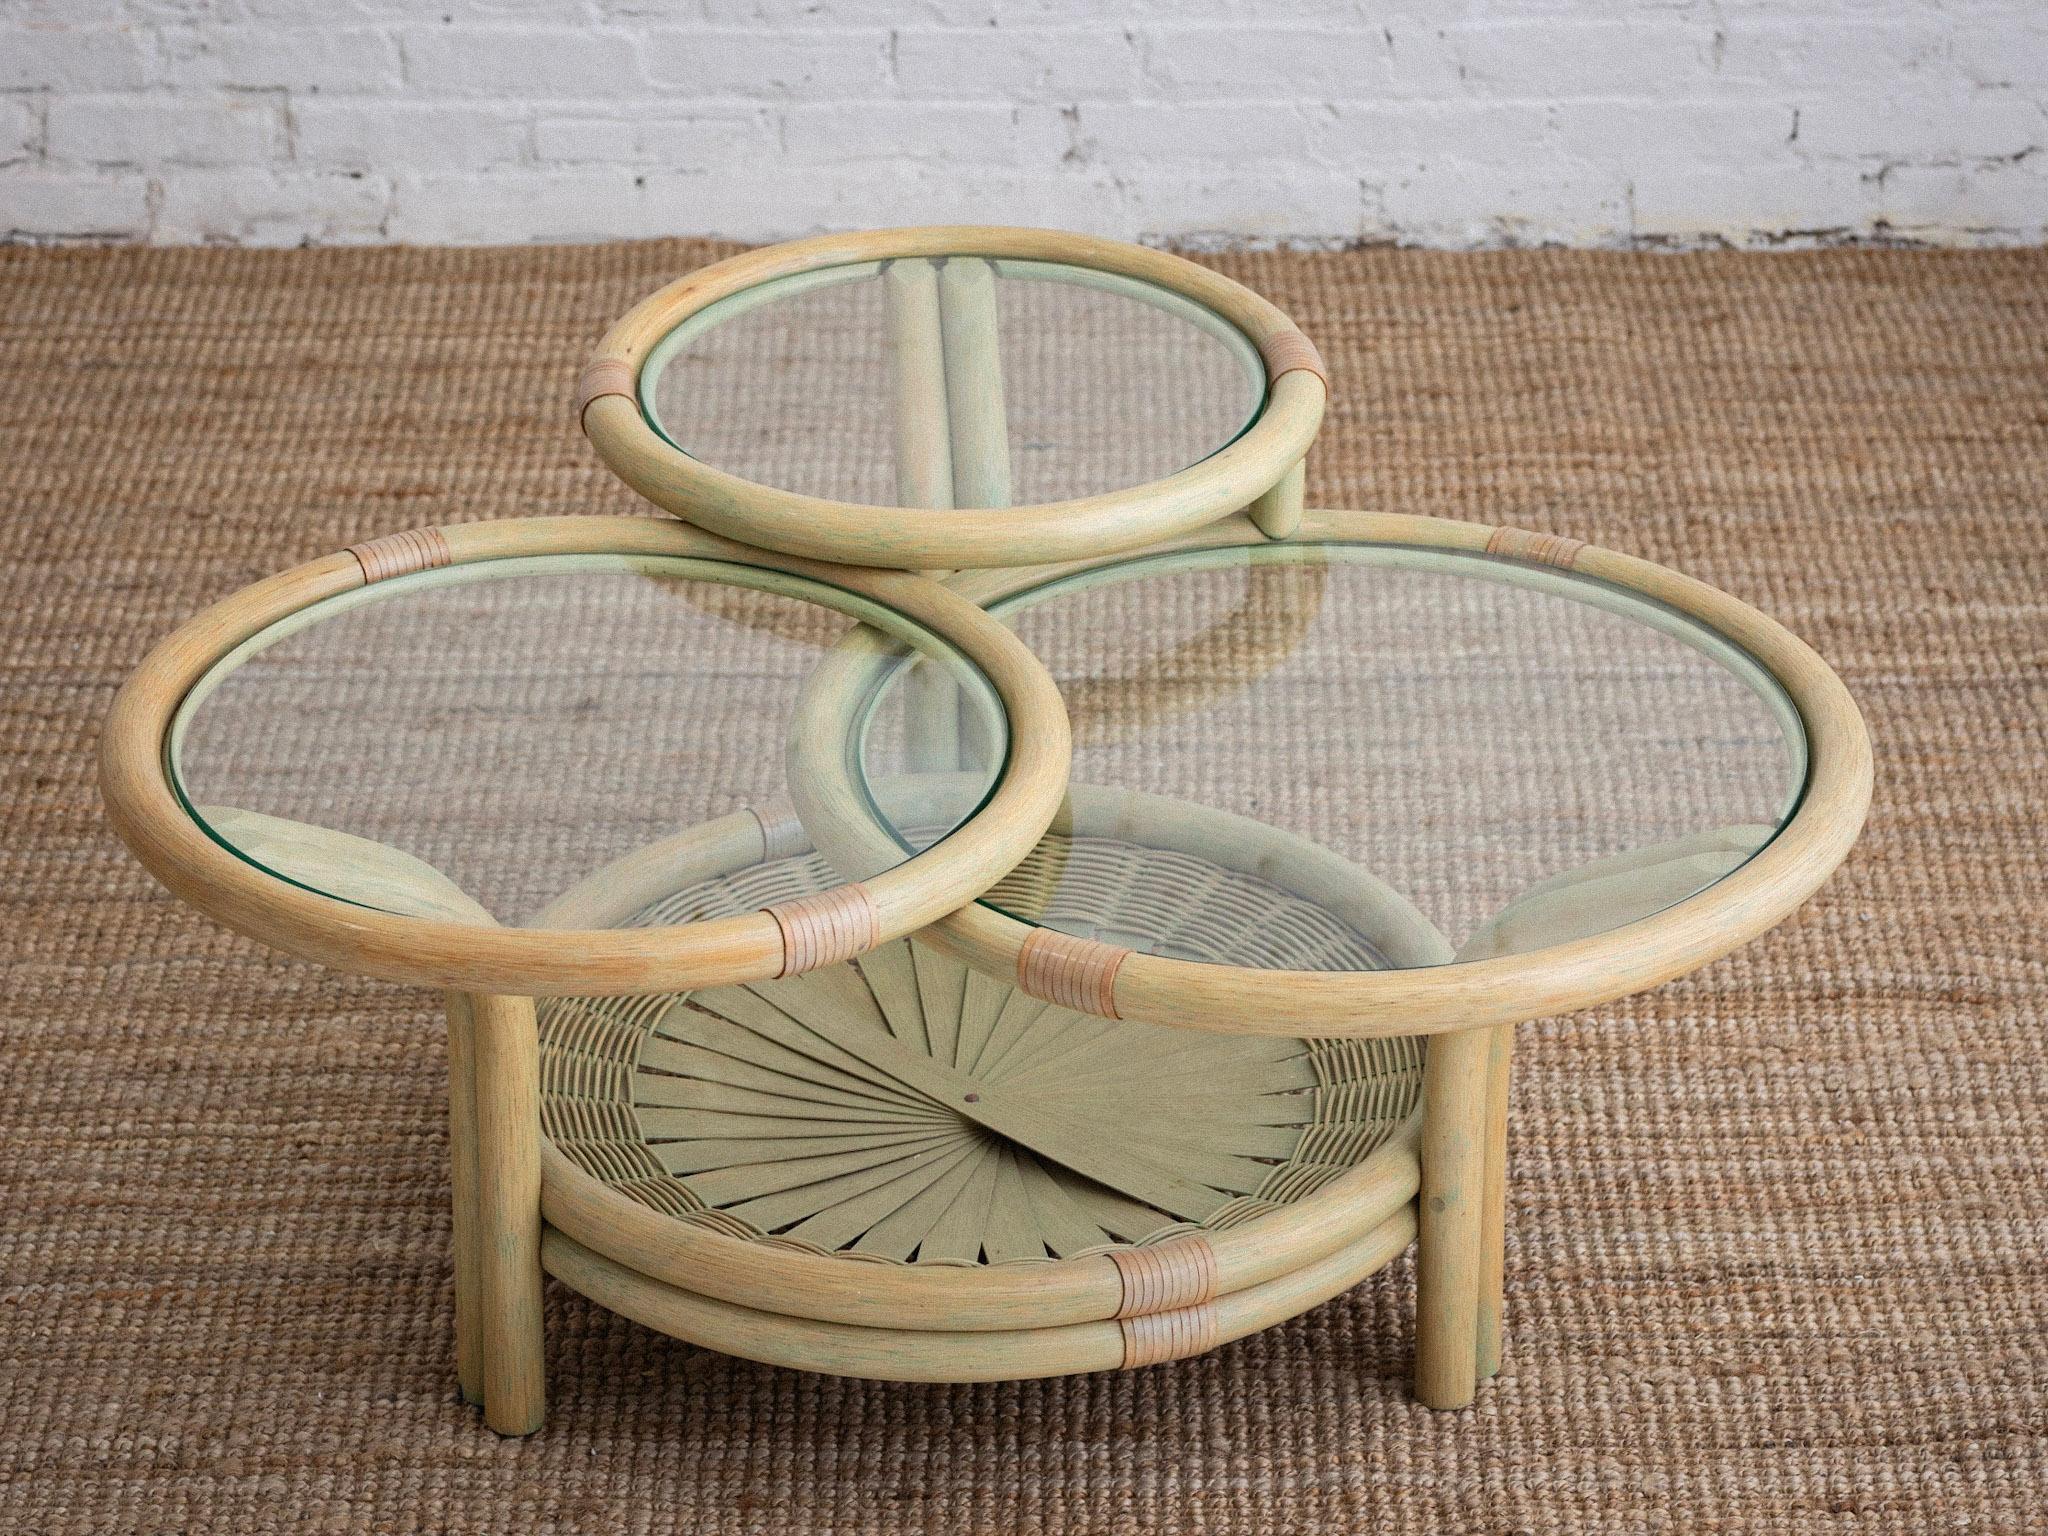 A bamboo and glass coffee table. Three circular tiers with glass tops. Pastel green wash. Bamboo fan detail in the base. Sourced in Northern Italy.